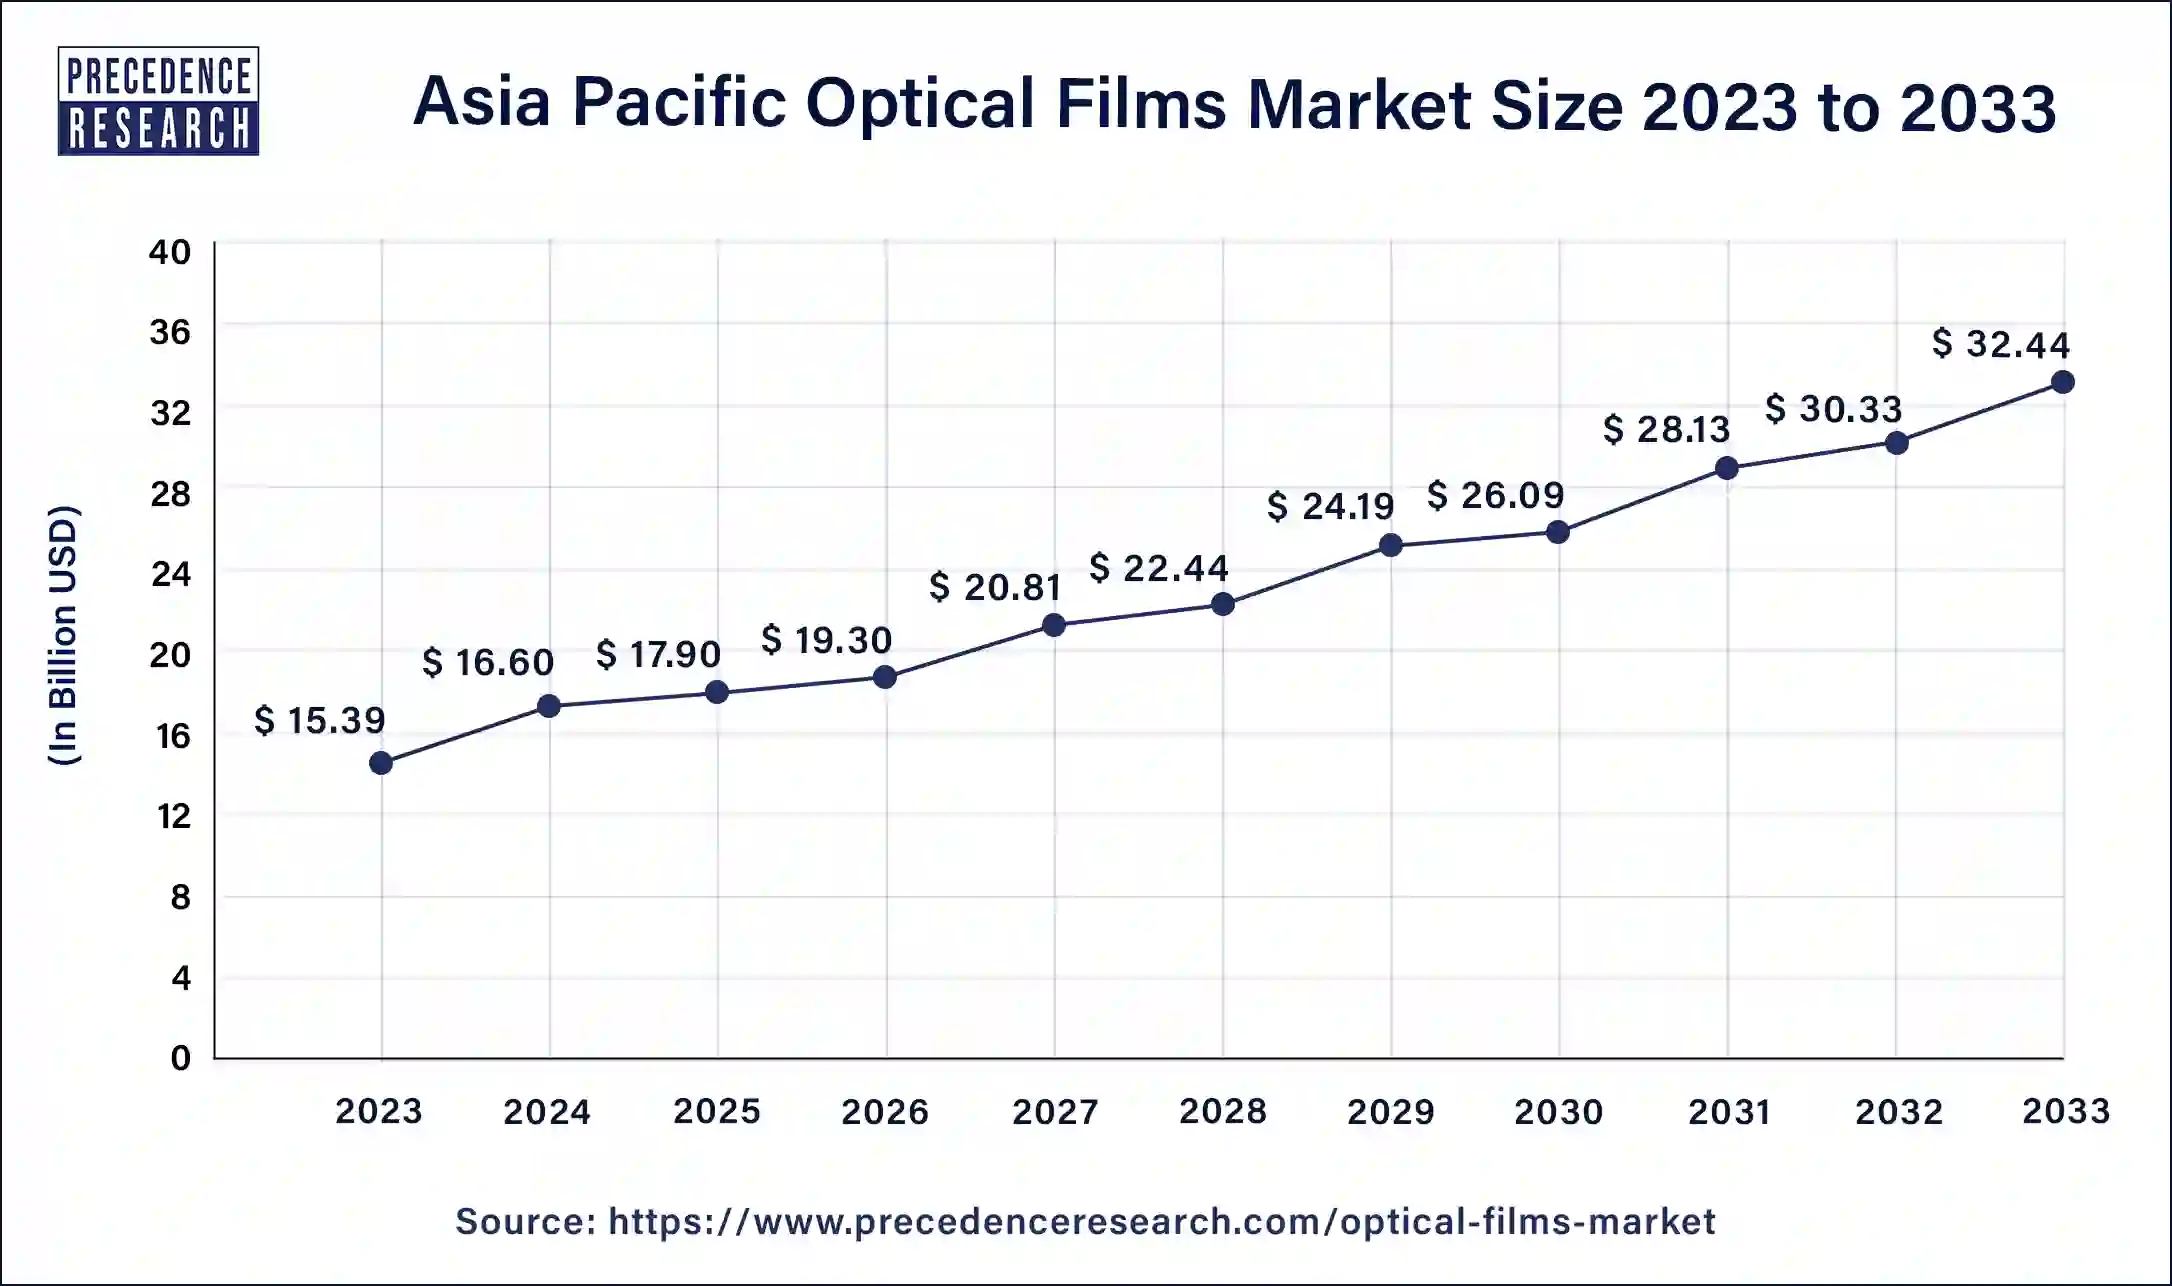 Asia Pacific Optical Films Market Size 2024 to 2033